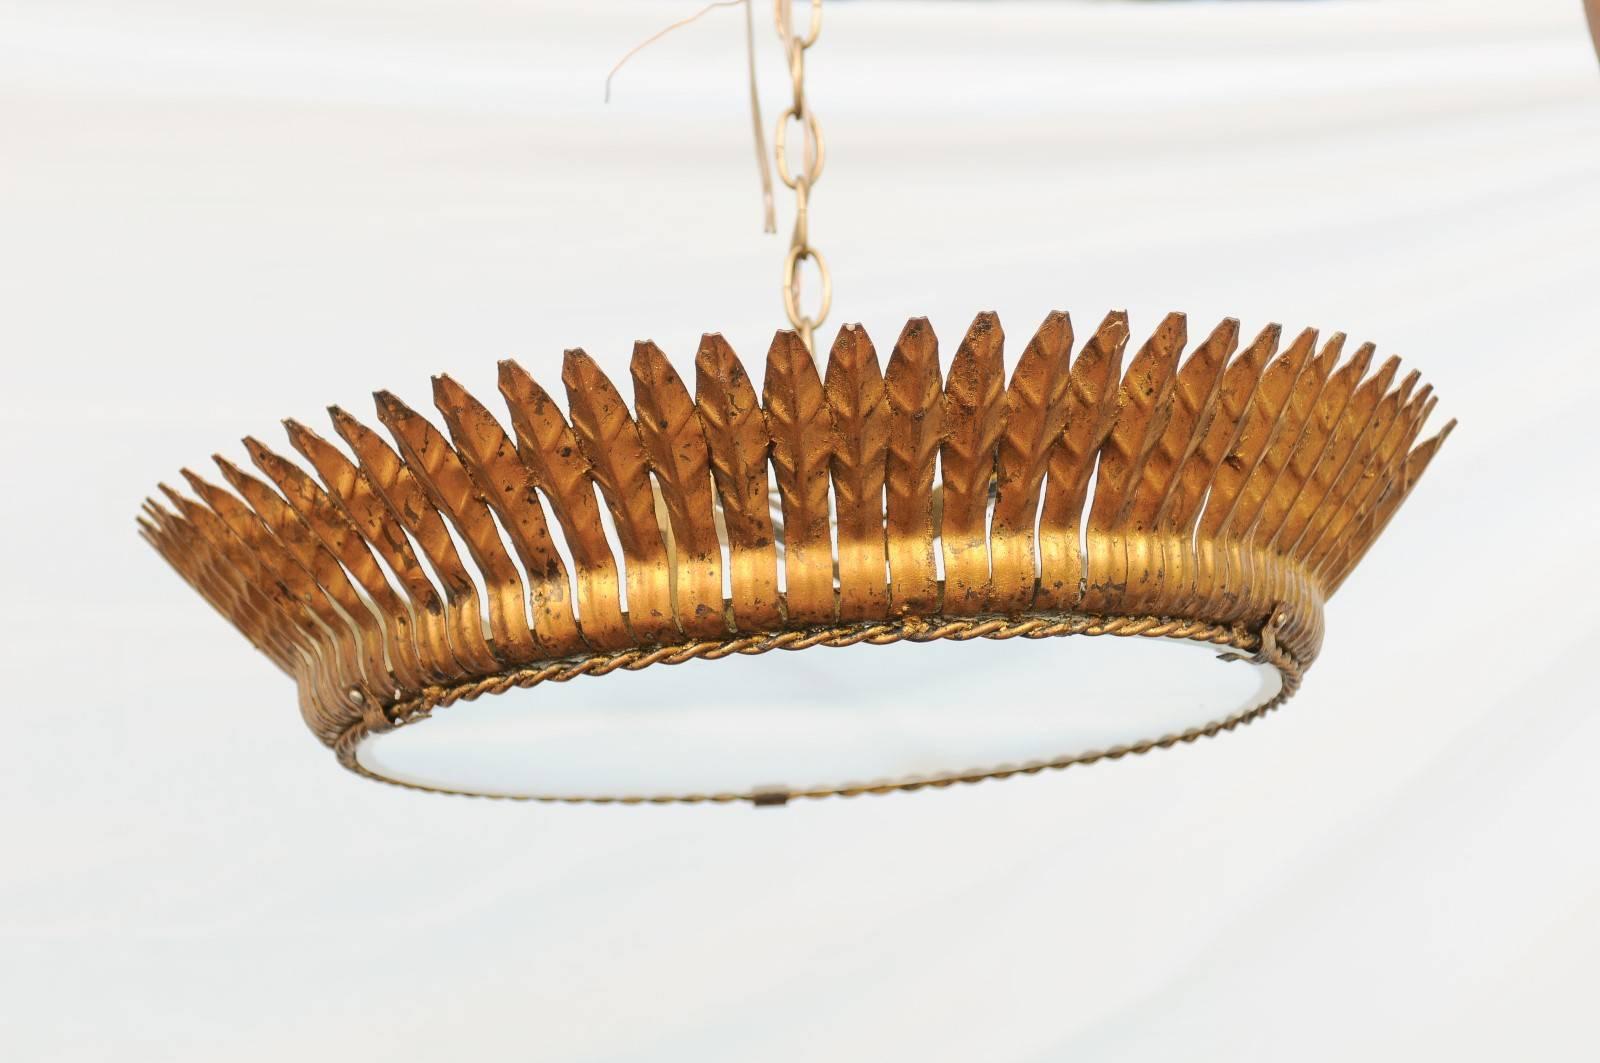 This Spanish mid-20th century crown semi-flush gilt metal light fixture with frosted glass features a single row of leaf motifs over a thin twisted surround. The two lights sit behind a frosted glass bottom that illuminates the room without being